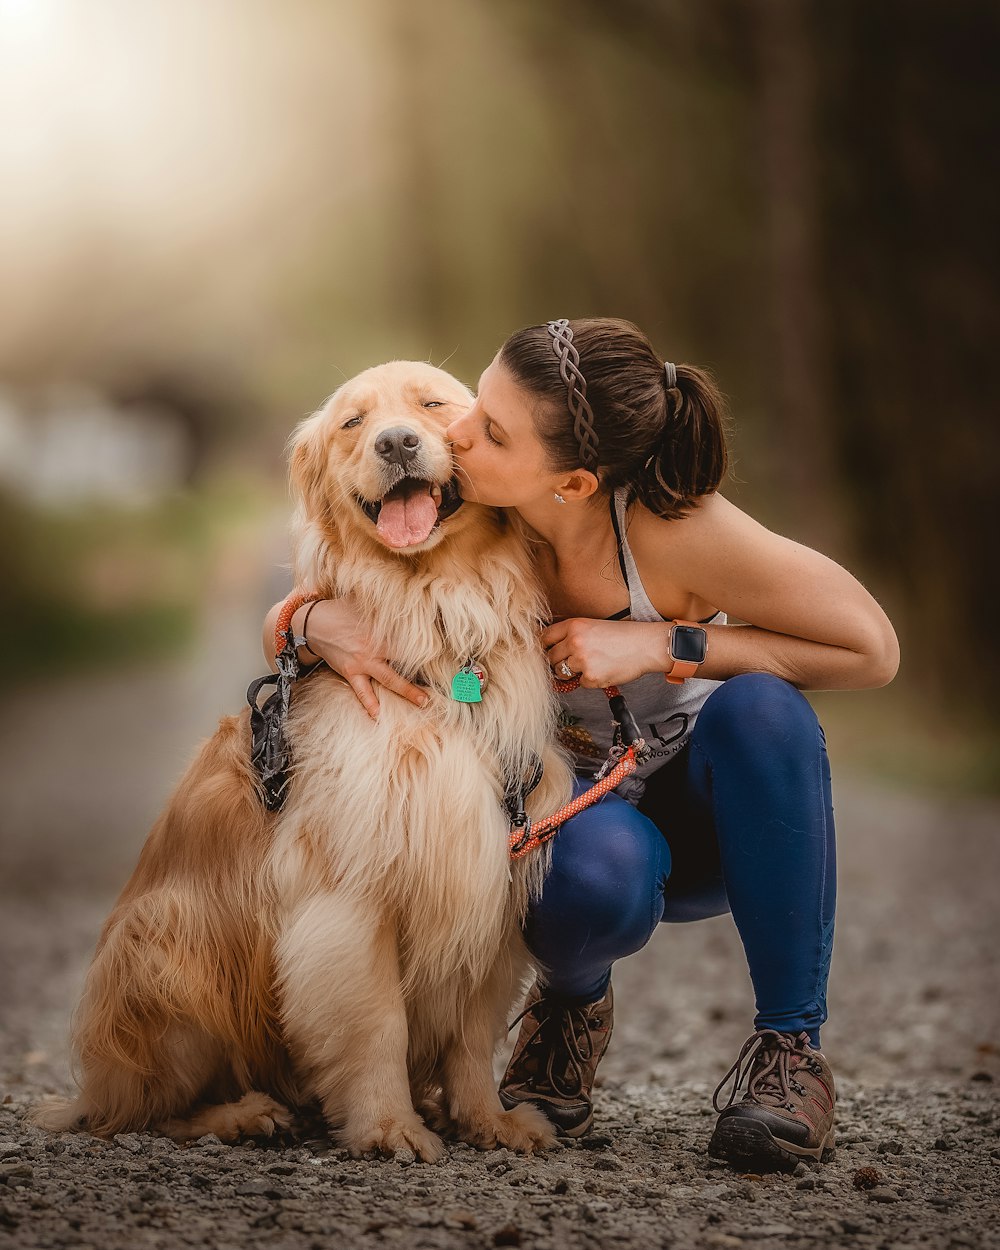 a woman kissing her dog on the cheek